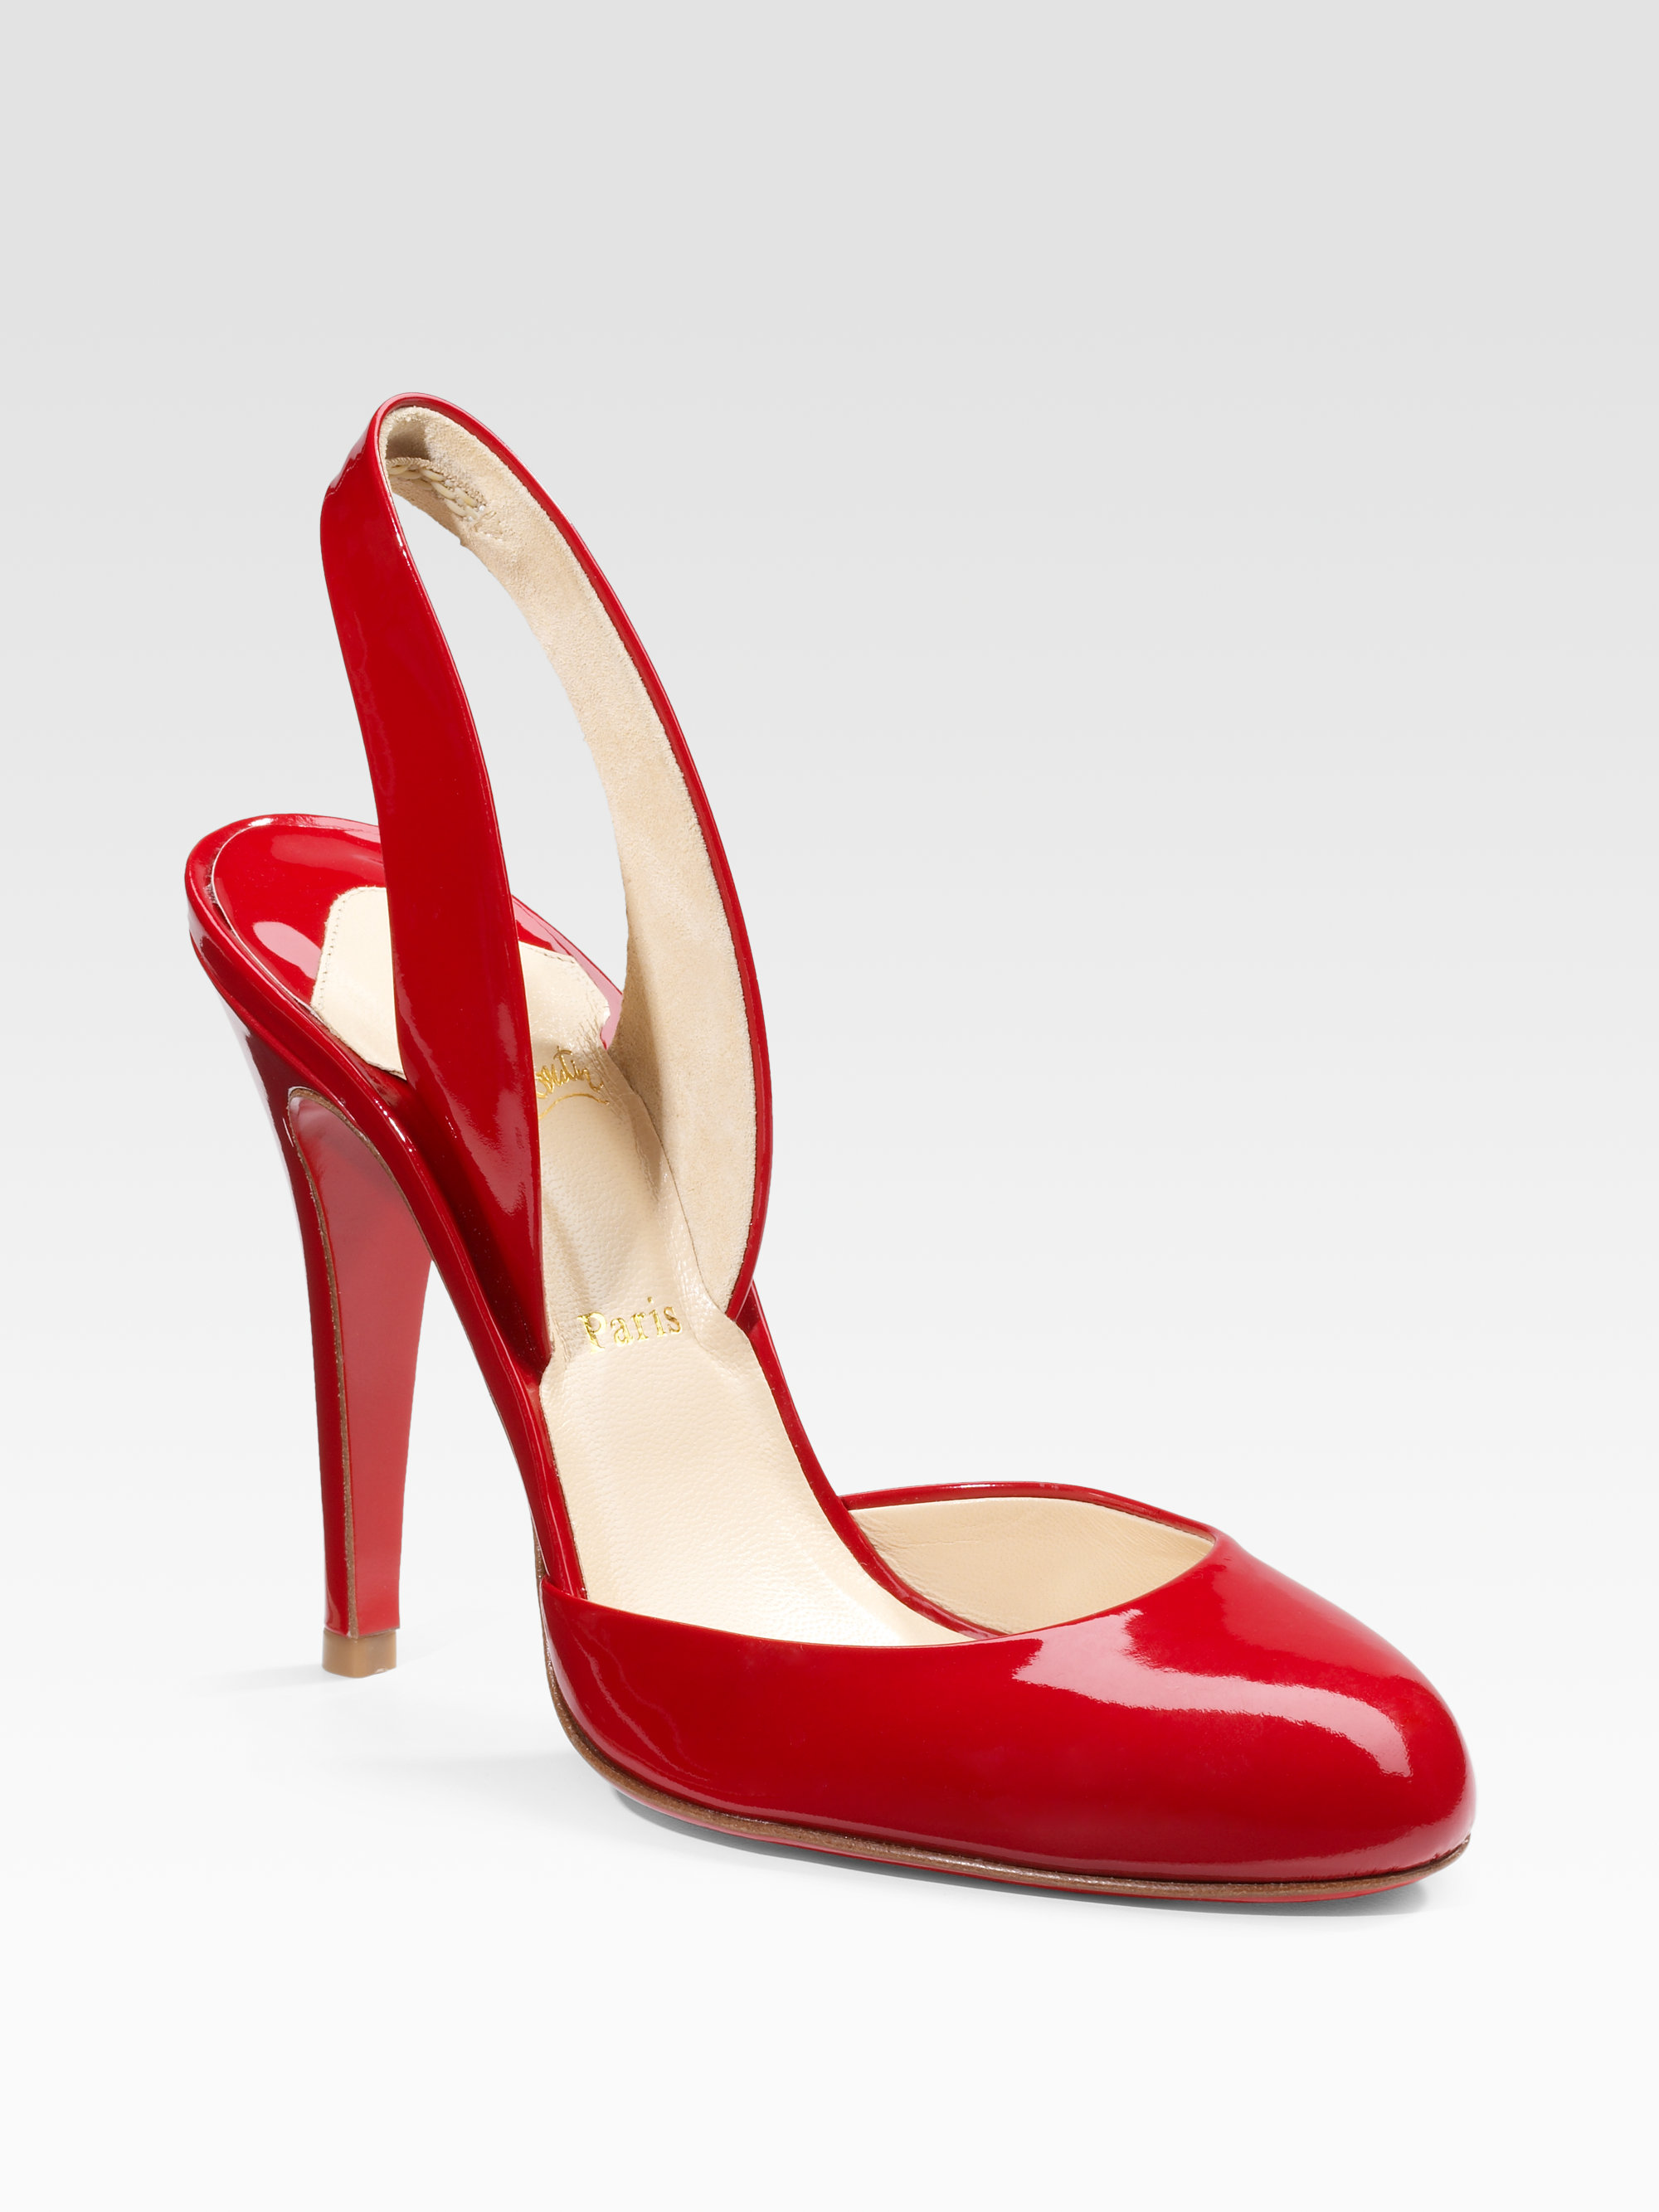 Lyst - Christian Louboutin Picador Slingbacks in Red